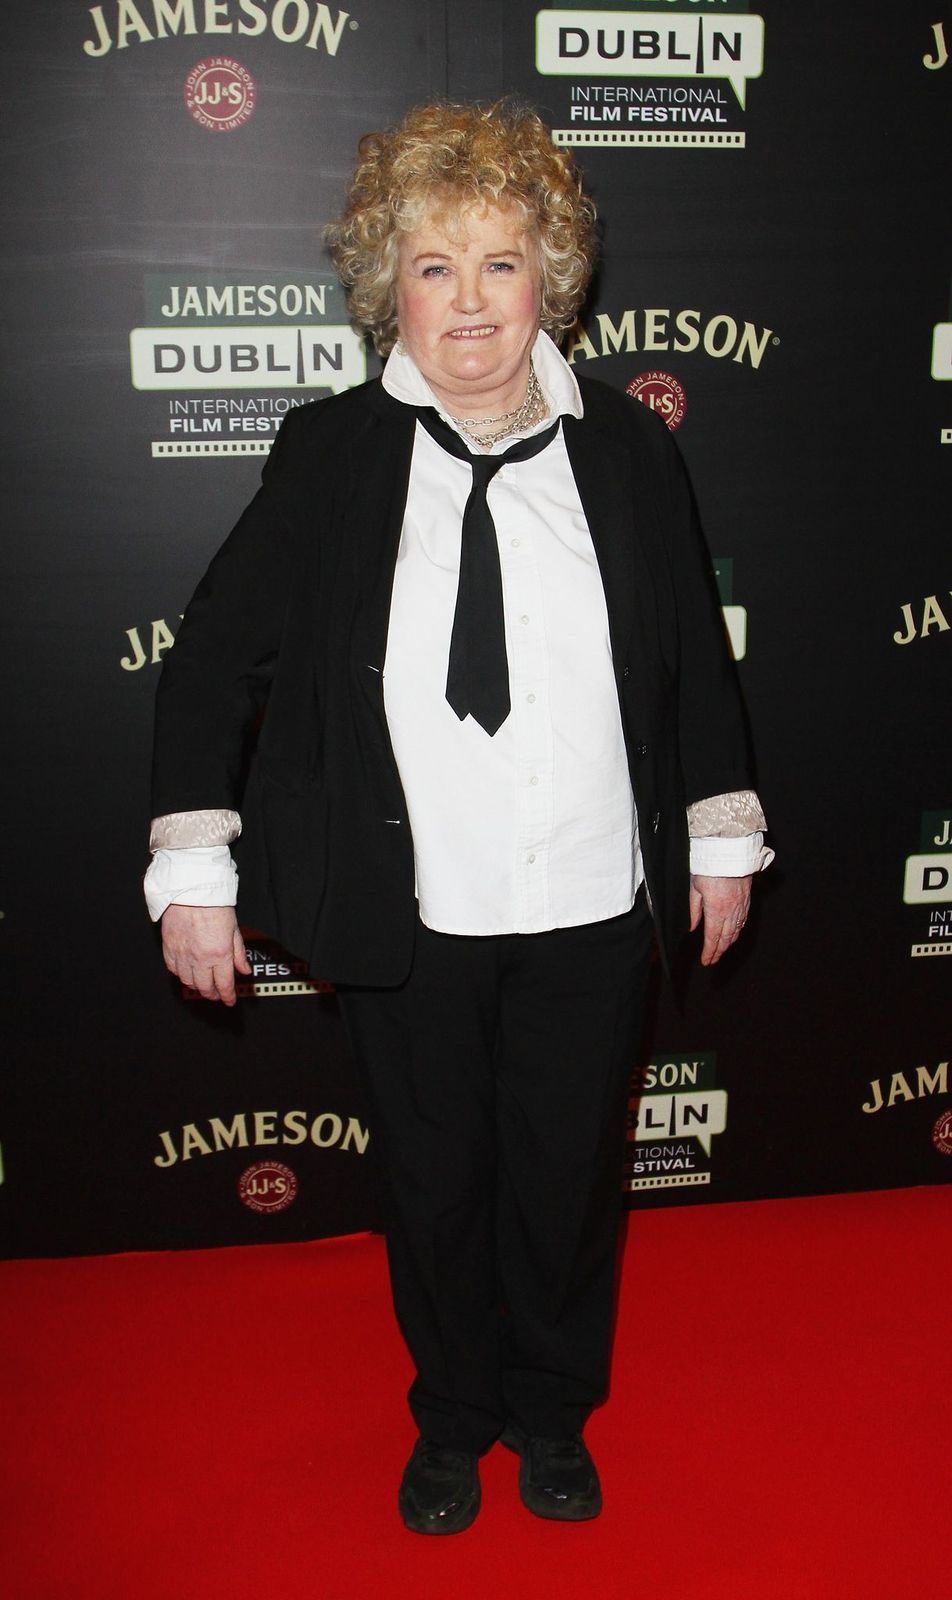 Brenda Fricker attends a screening of "A Long Way From Home" at the Jameson Dublin International Film Festival at Savoy on February 15, 2014 in Dublin, Ireland. | Photo: Getty Images